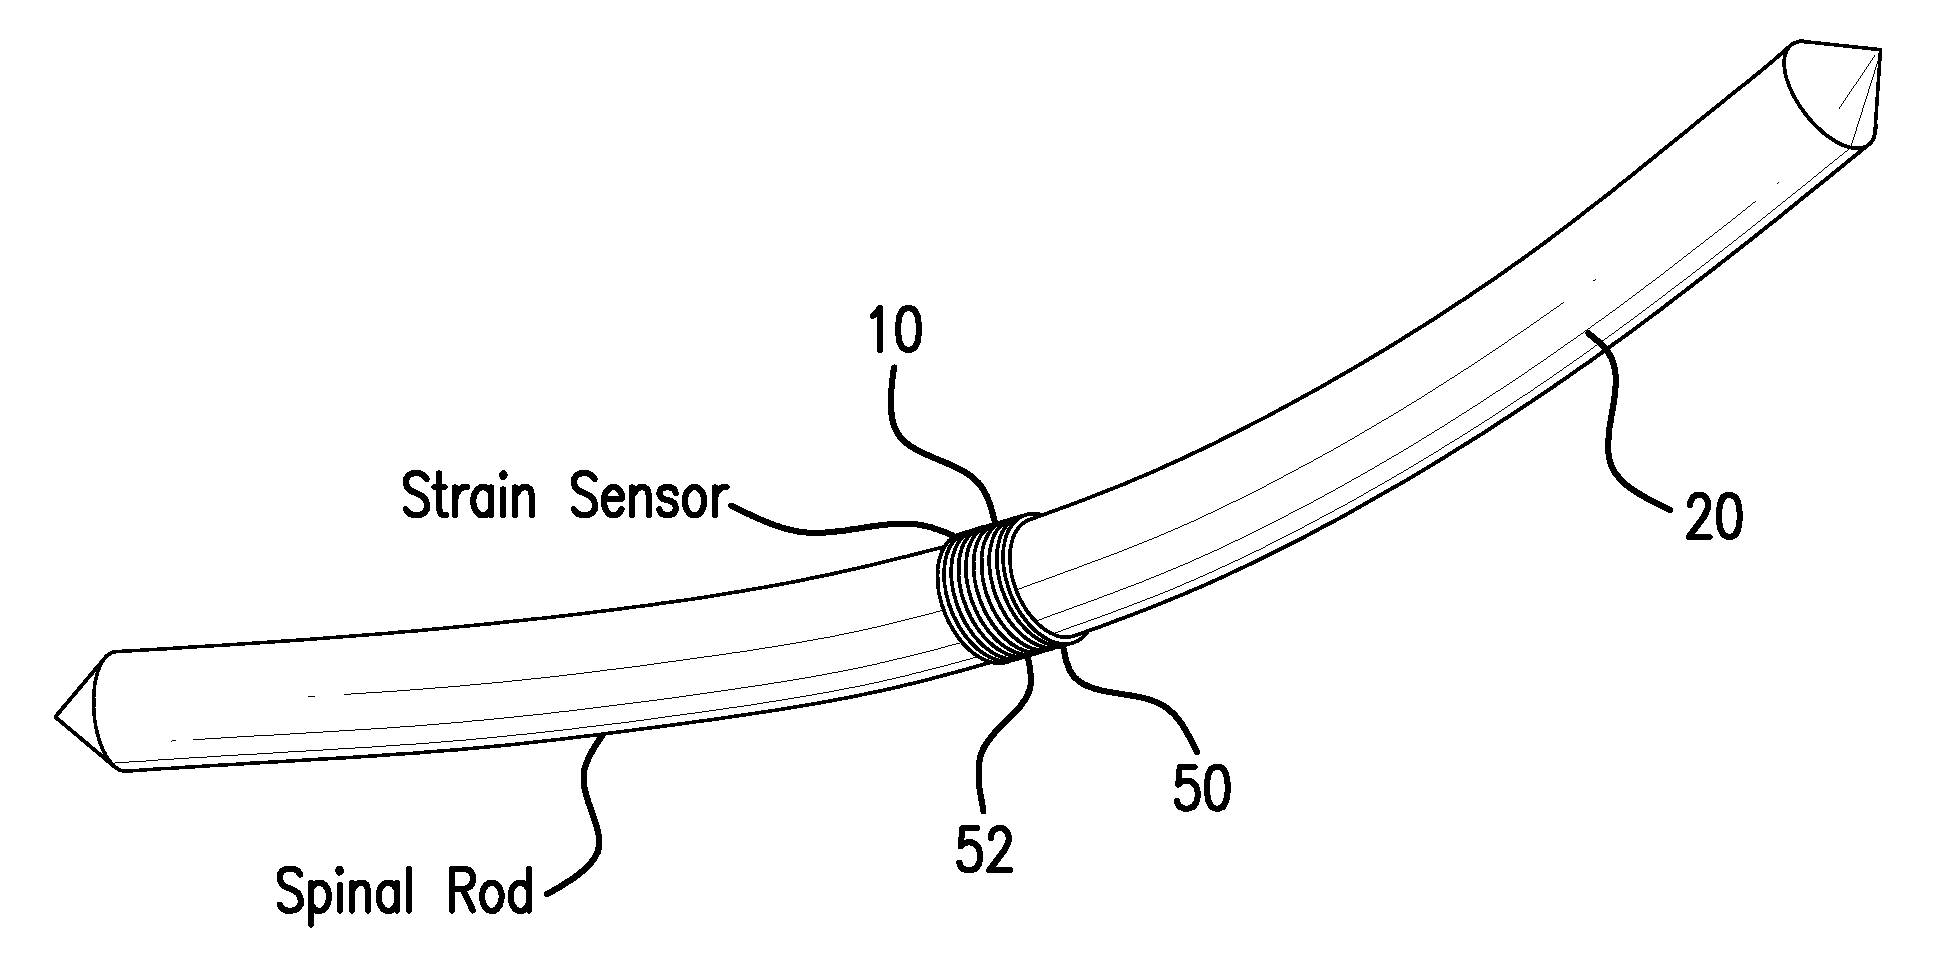 Strain monitoring system and apparatus